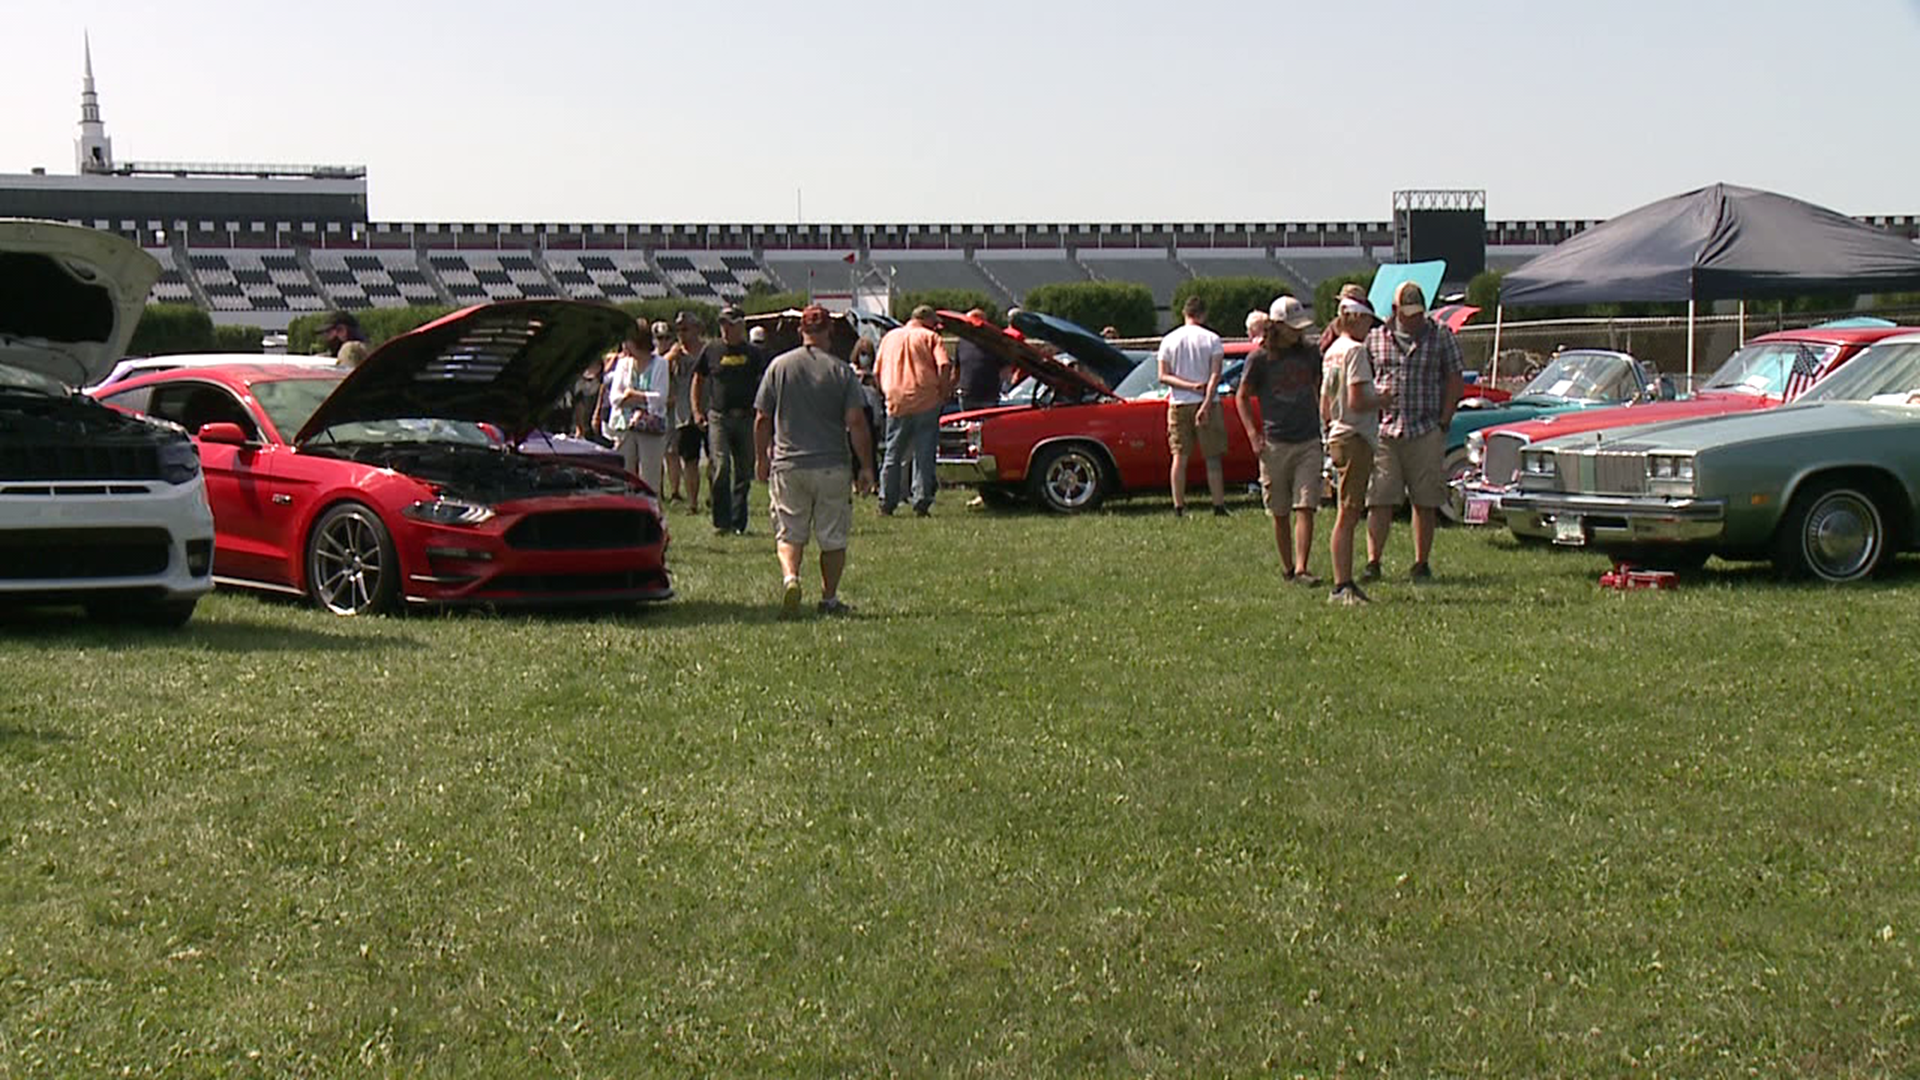 More than 100 vehicles were at The Blakeslee Rotary Club 2nd annual Car Show.